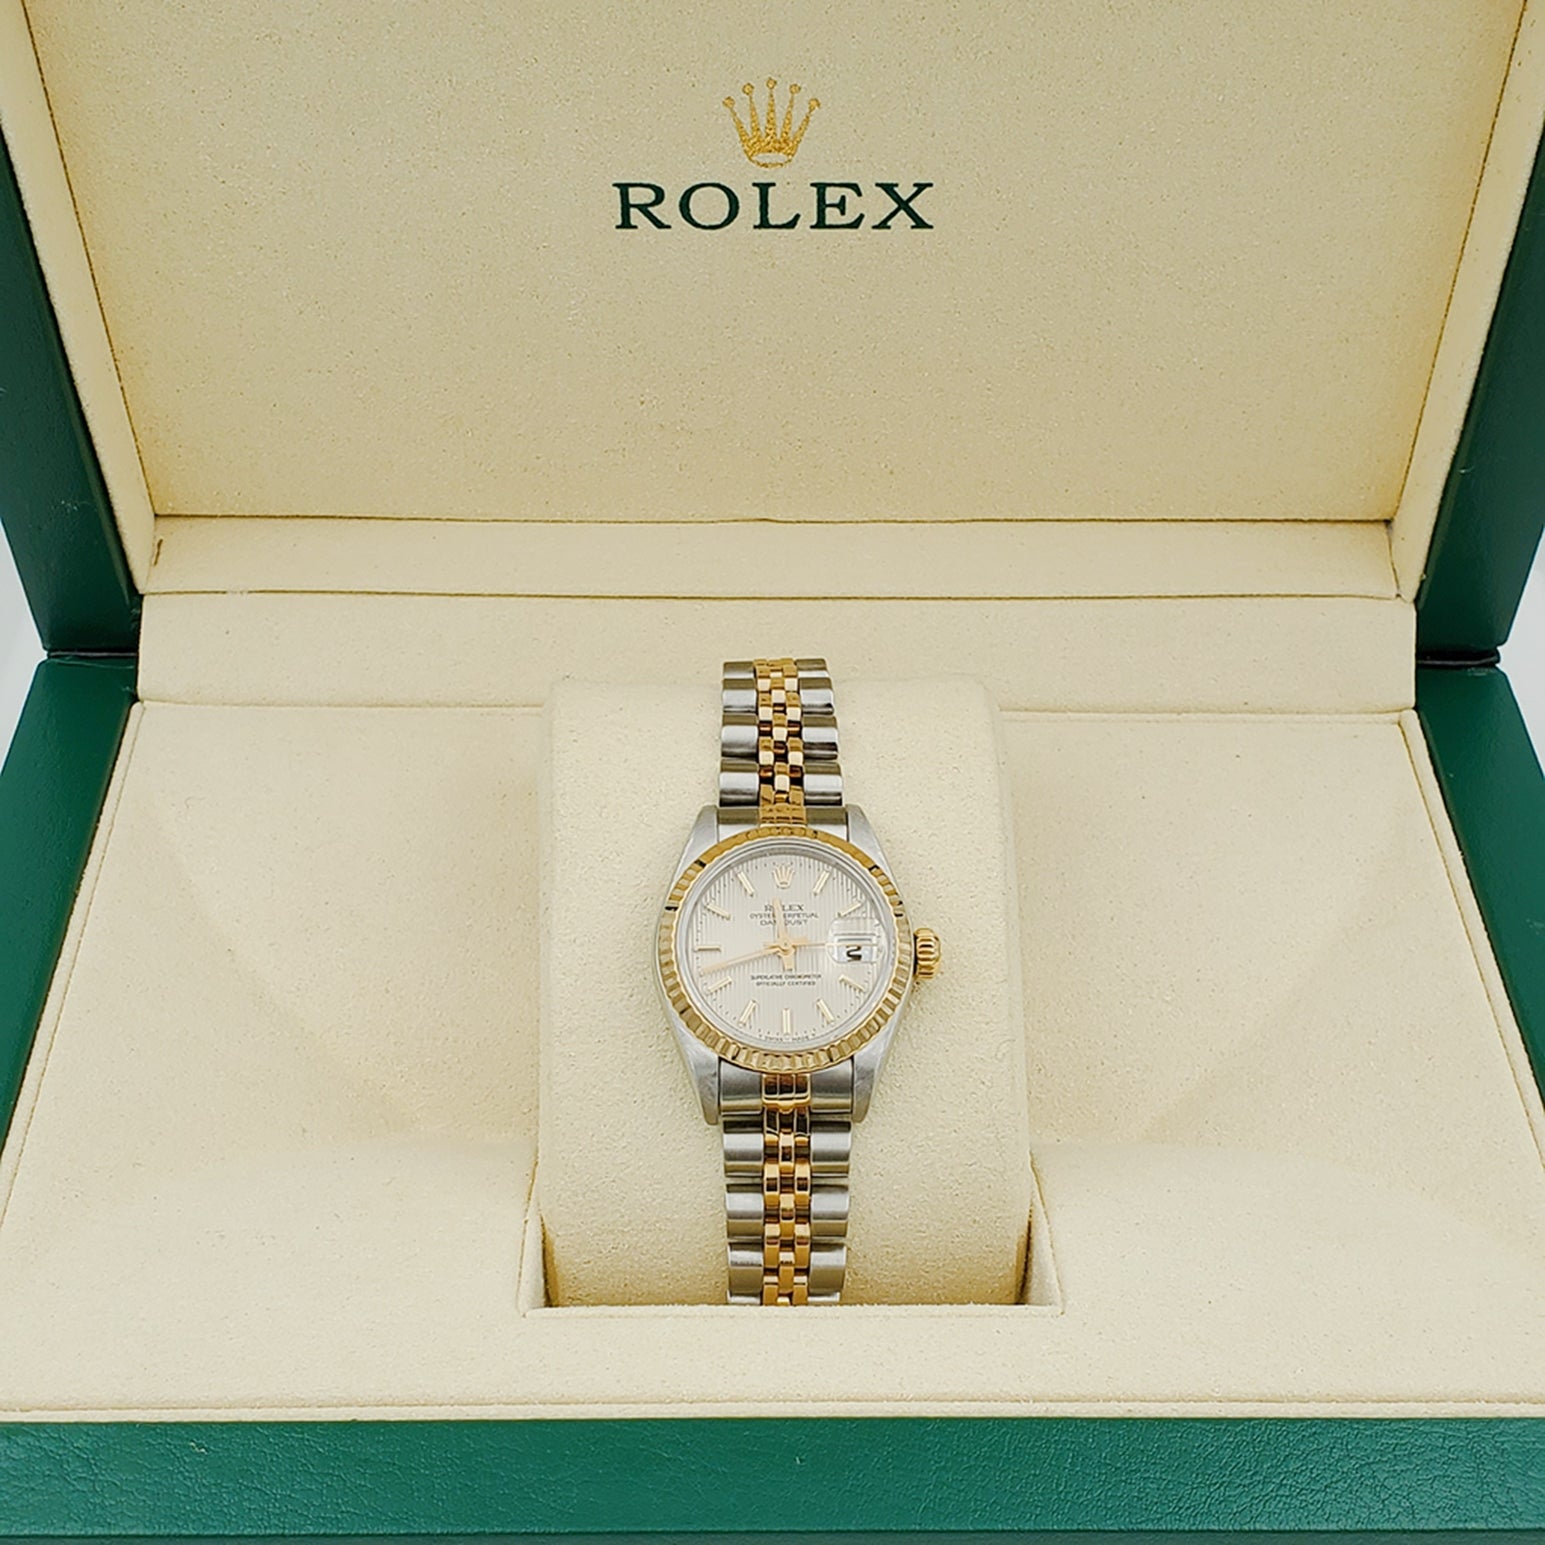 Ladies Rolex 26mm DateJust Two Tone 18K Yellow Gold / Stainless Steel Watch with Tapestry Dial and Fluted Bezel. (Pre-Owned)